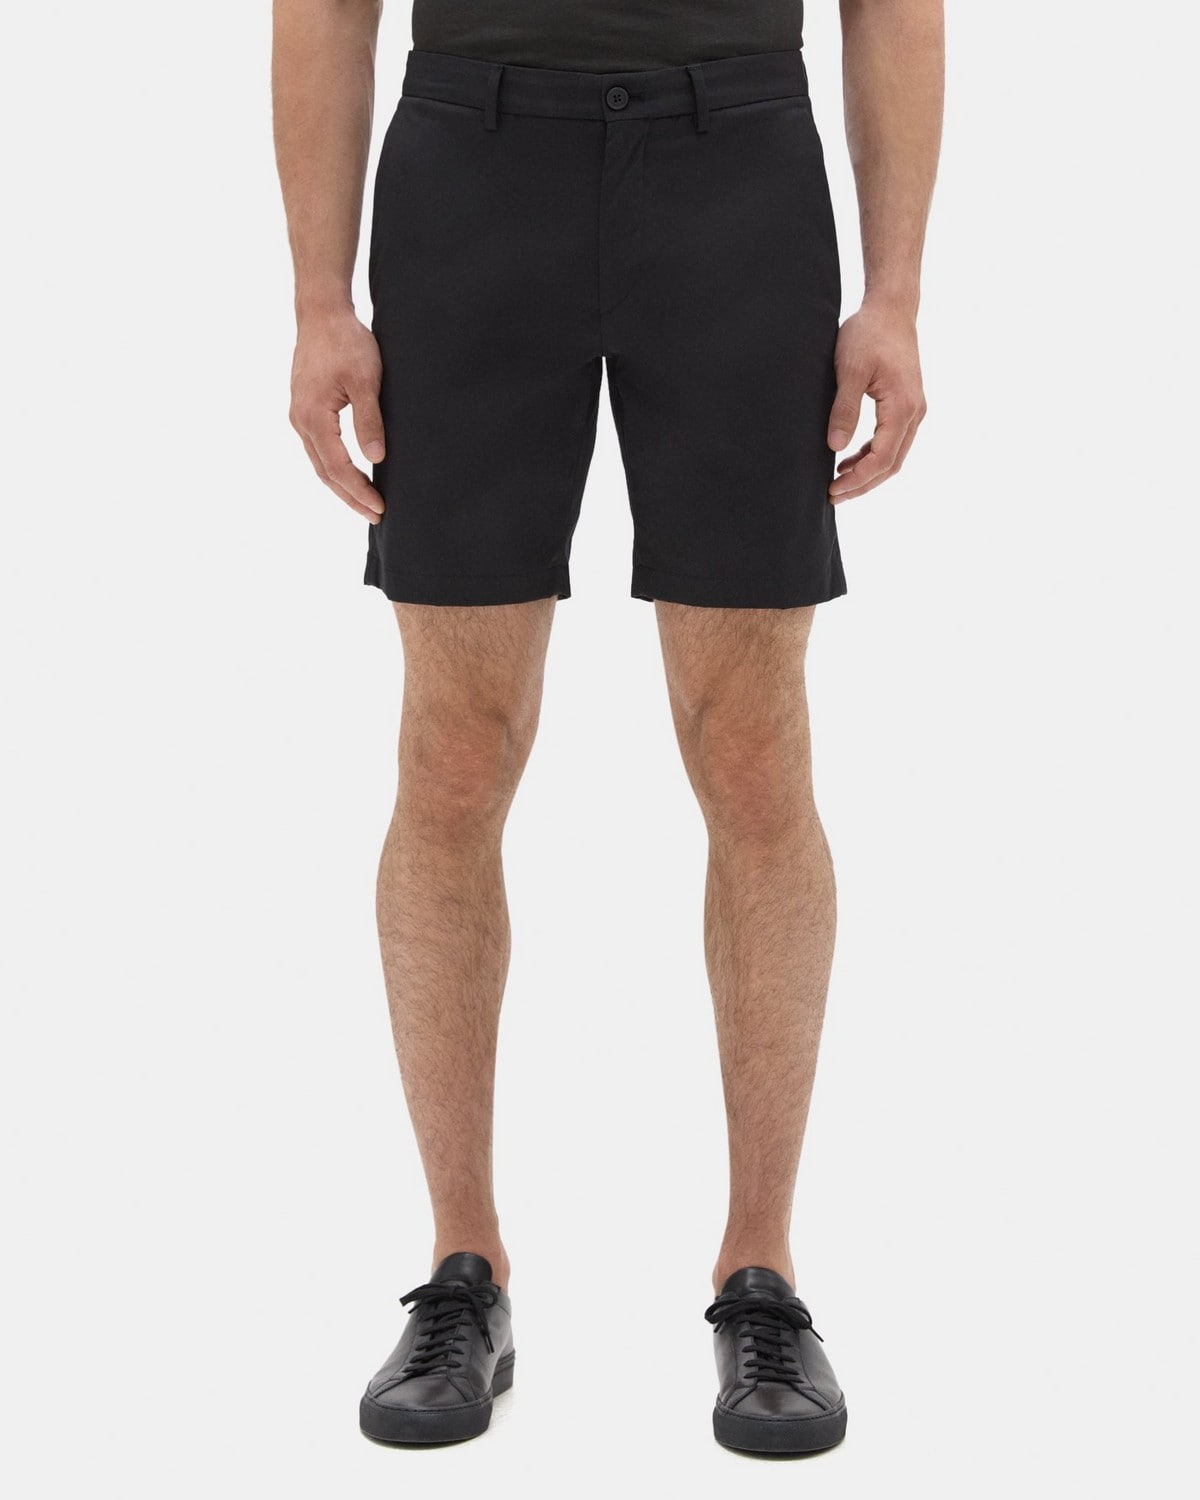 34 Theory Men's Zaine Ascend Tech Flat Front Shorts Navy Size 30 38 NWT 